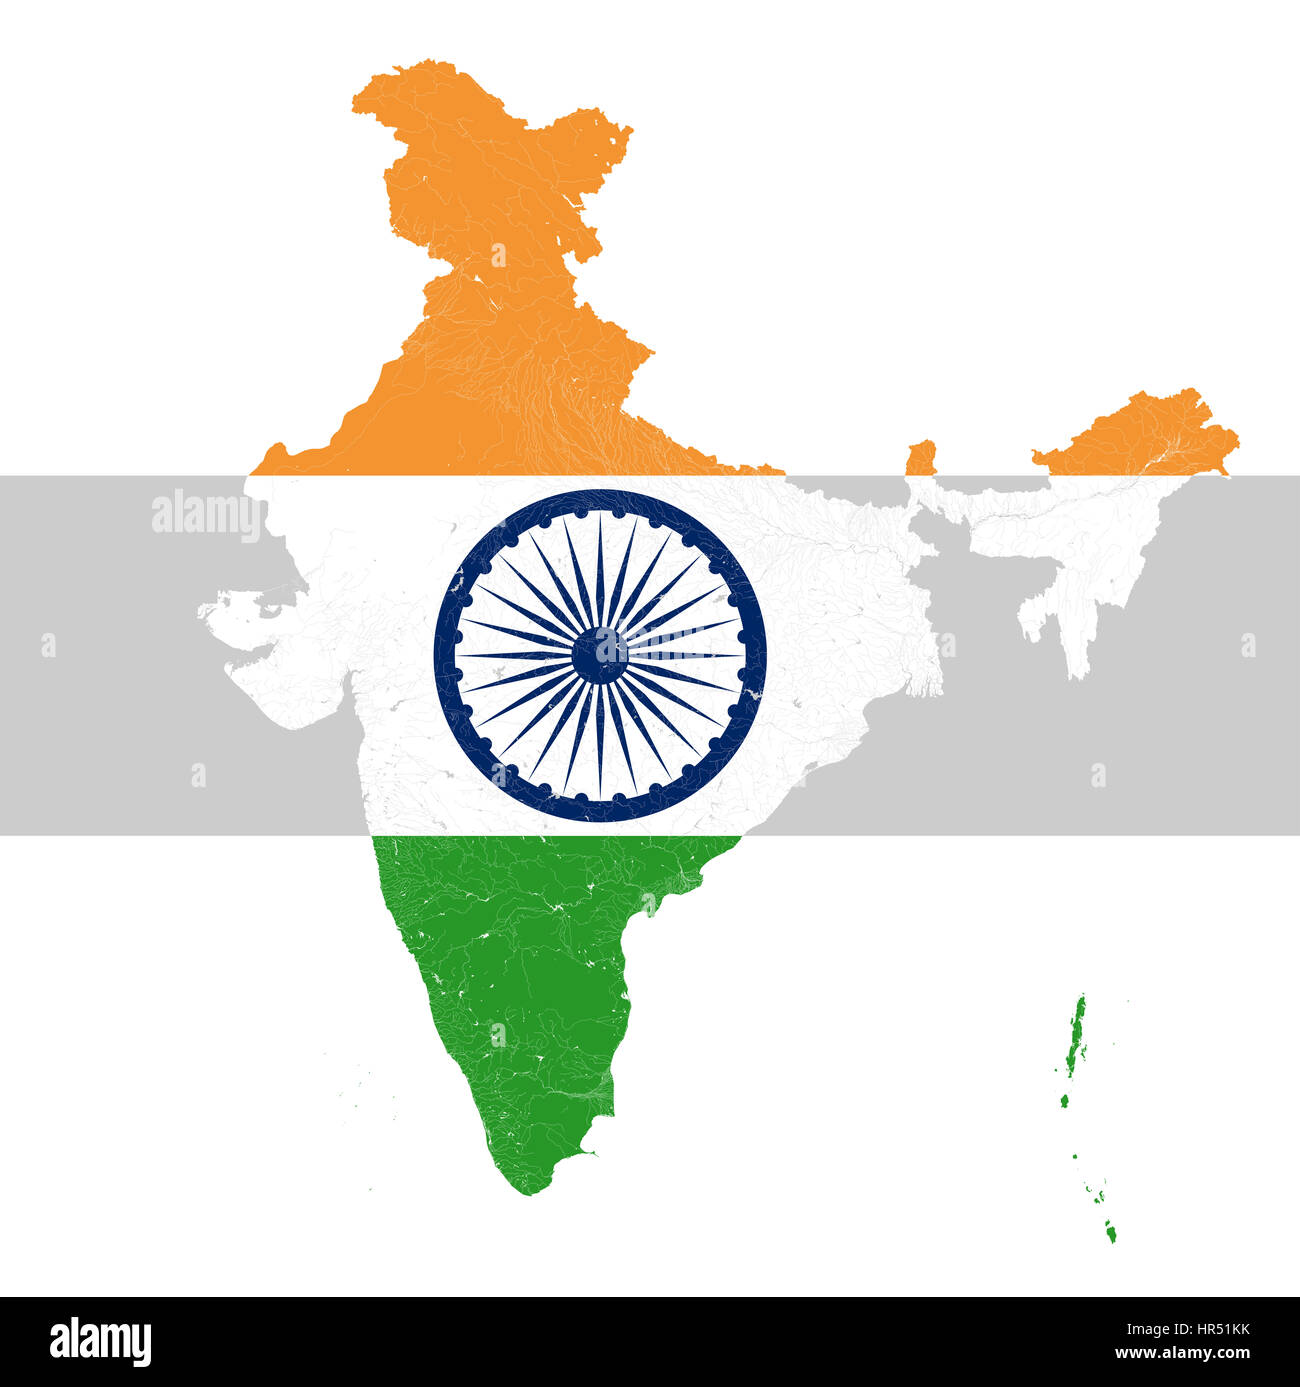 Map of India with rivers and lakes in colors of the national flag of India.. Map consists of separate maps of federal states and union territories tha Stock Photo